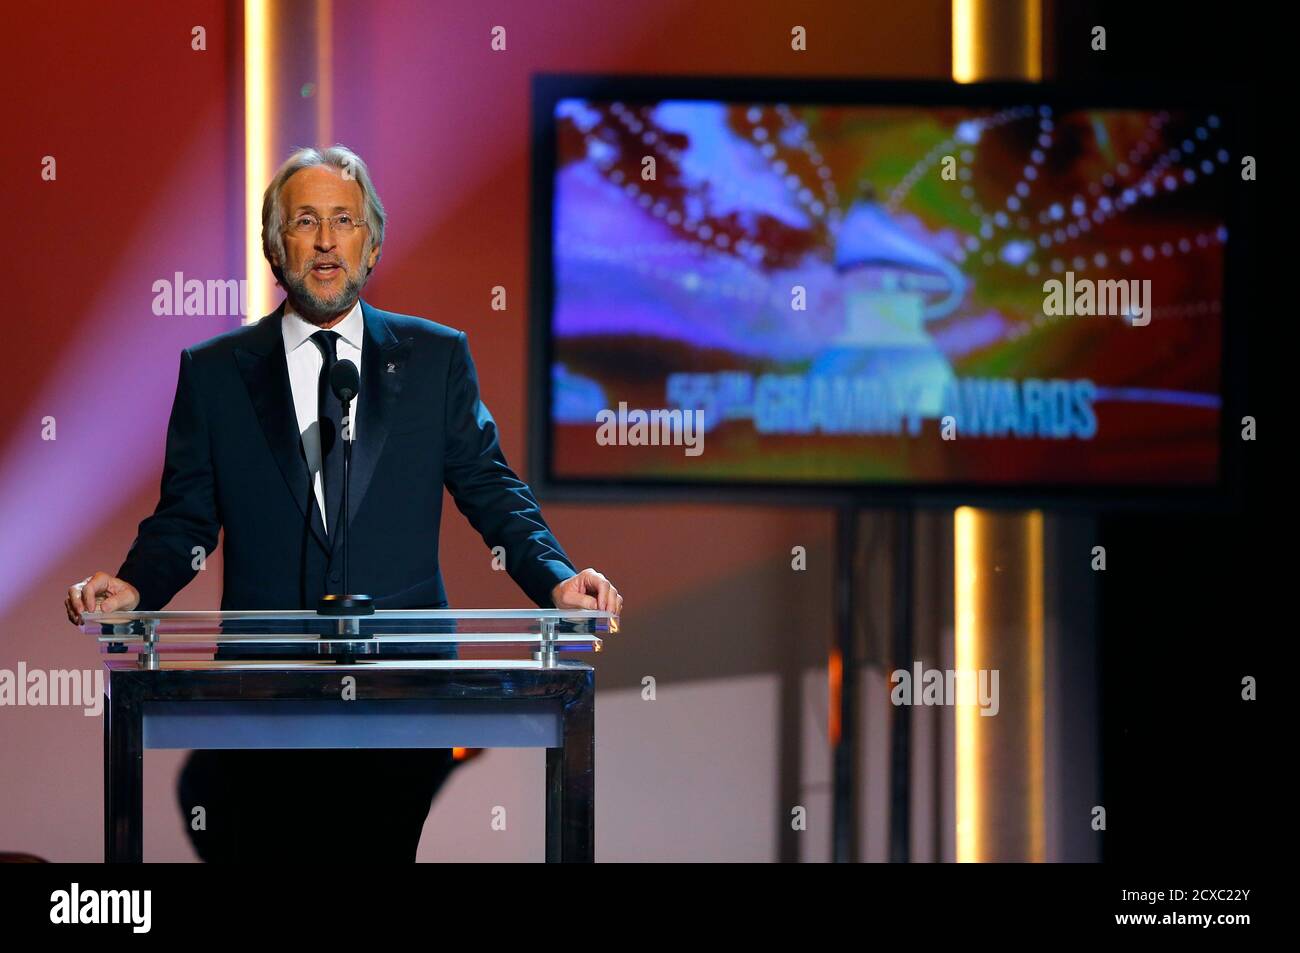 Neil Portnow, president of the National Academy of Recording Arts and Sciences, speaks at the 55th annual Grammy Awards in Los Angeles, California, February 10, 2013.       REUTERS/Mike Blake (UNITED STATES  - Tags: ENTERTAINMENT)   (GRAMMY-SHOW) Stock Photo